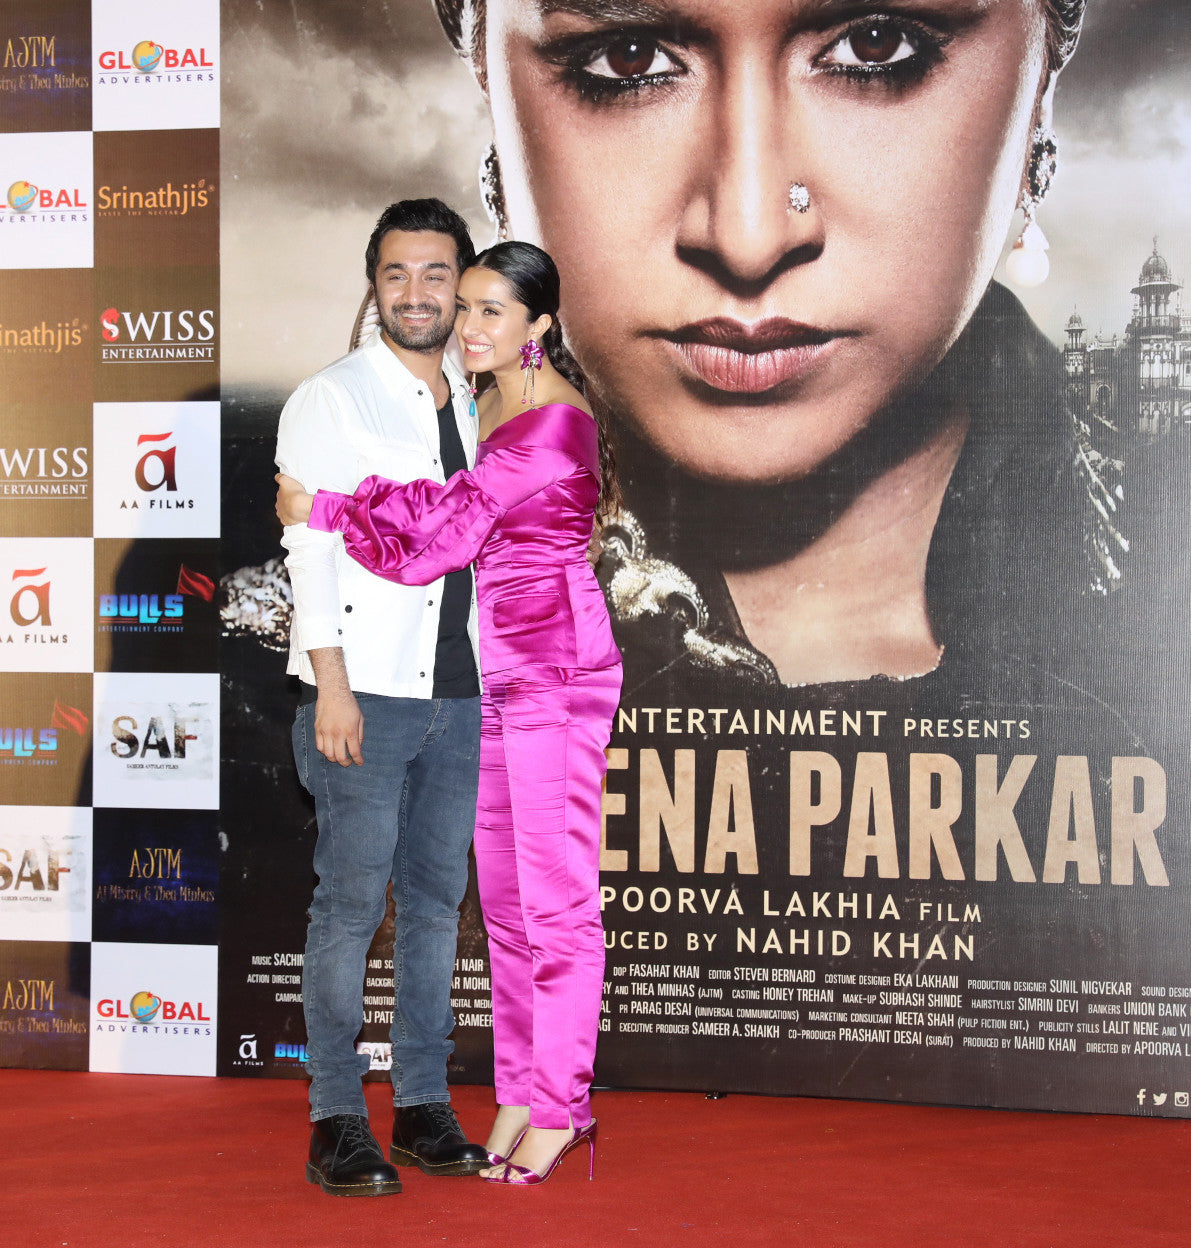 Shraddha Kapoor In Atsu Sekhose’s Pantsuit At The Trailer Launch Event Of 'Haseena Parkar'